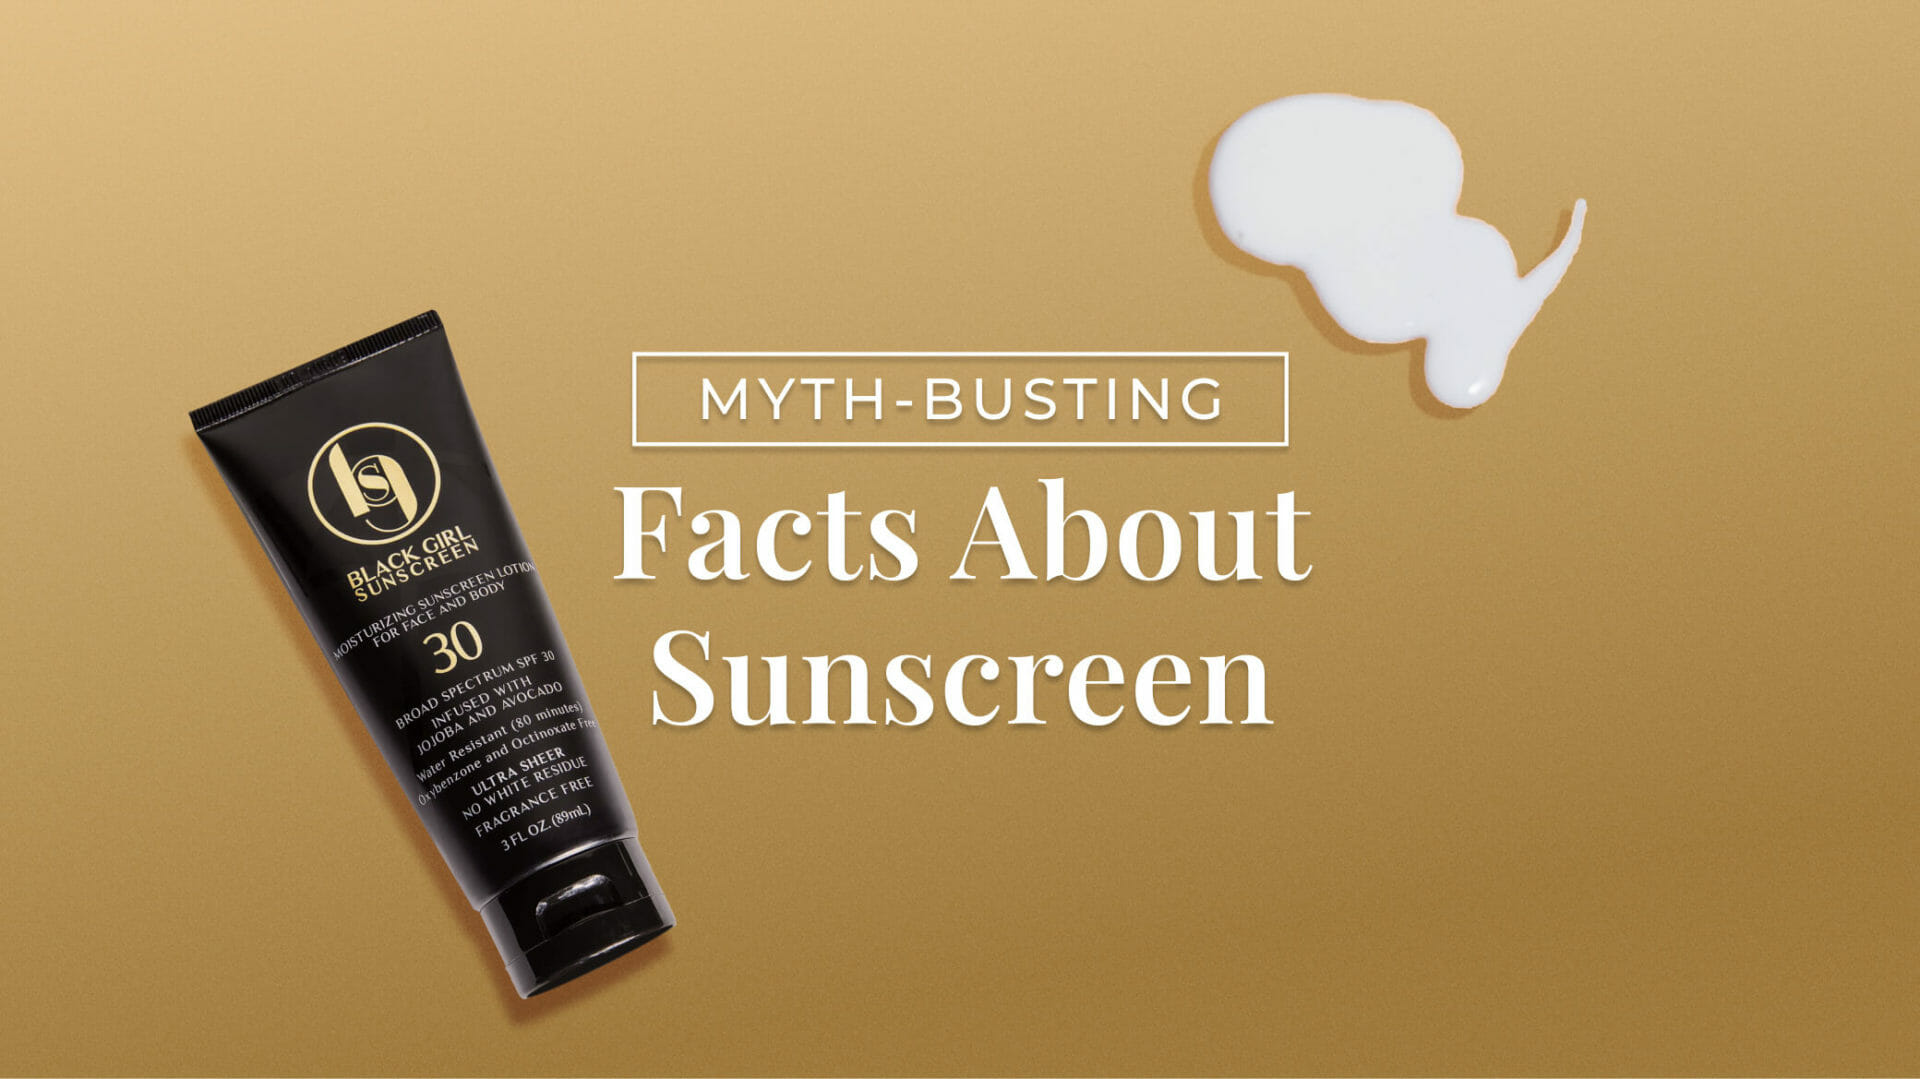 Myth-Busting Facts About Sunscreen You Need To Know